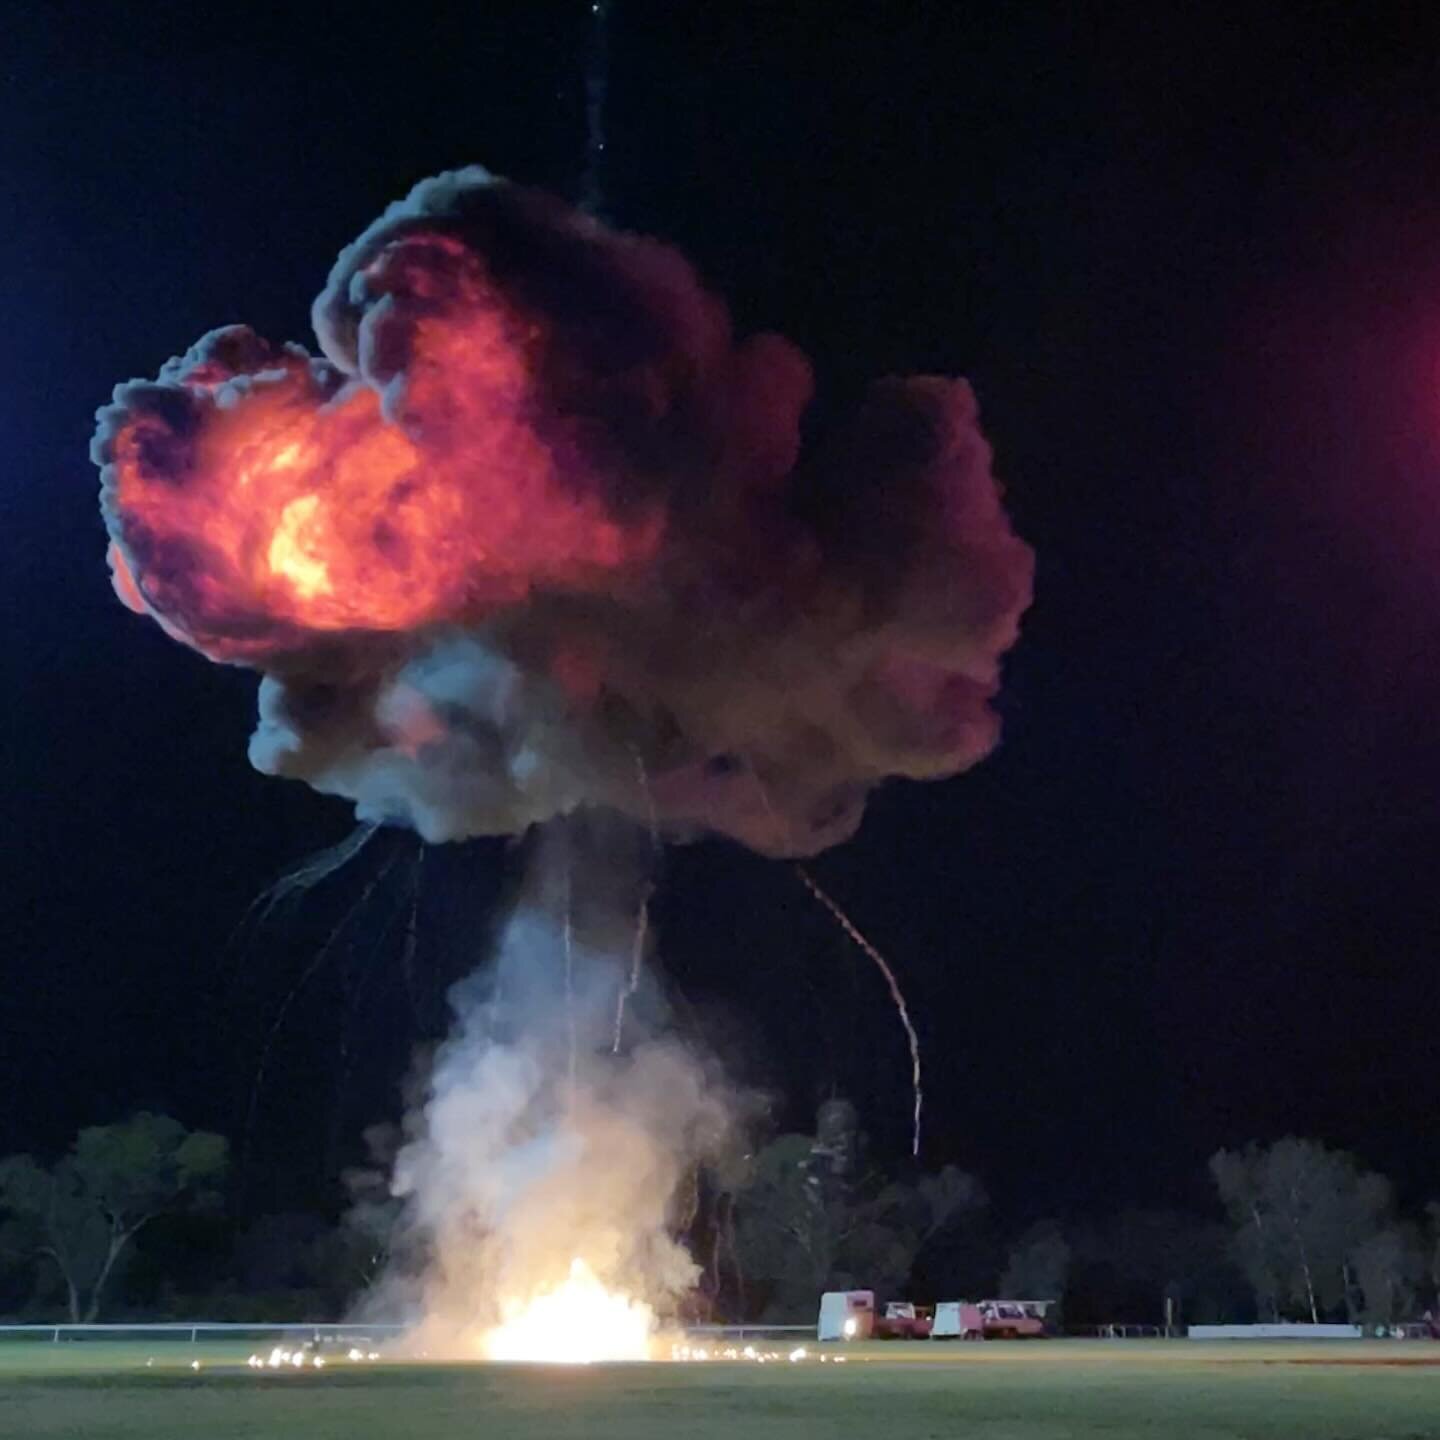 A pyrotechnic spectacular at the Lightning Ridge Easter Festival, including a mini-mushroom cloud of a Hollywood-style explosion to start the show. Absolutely delightful! 🎆💥🎇 #lightningridgeeasterfestival #lightningridge #fireworks #bigbadaboom